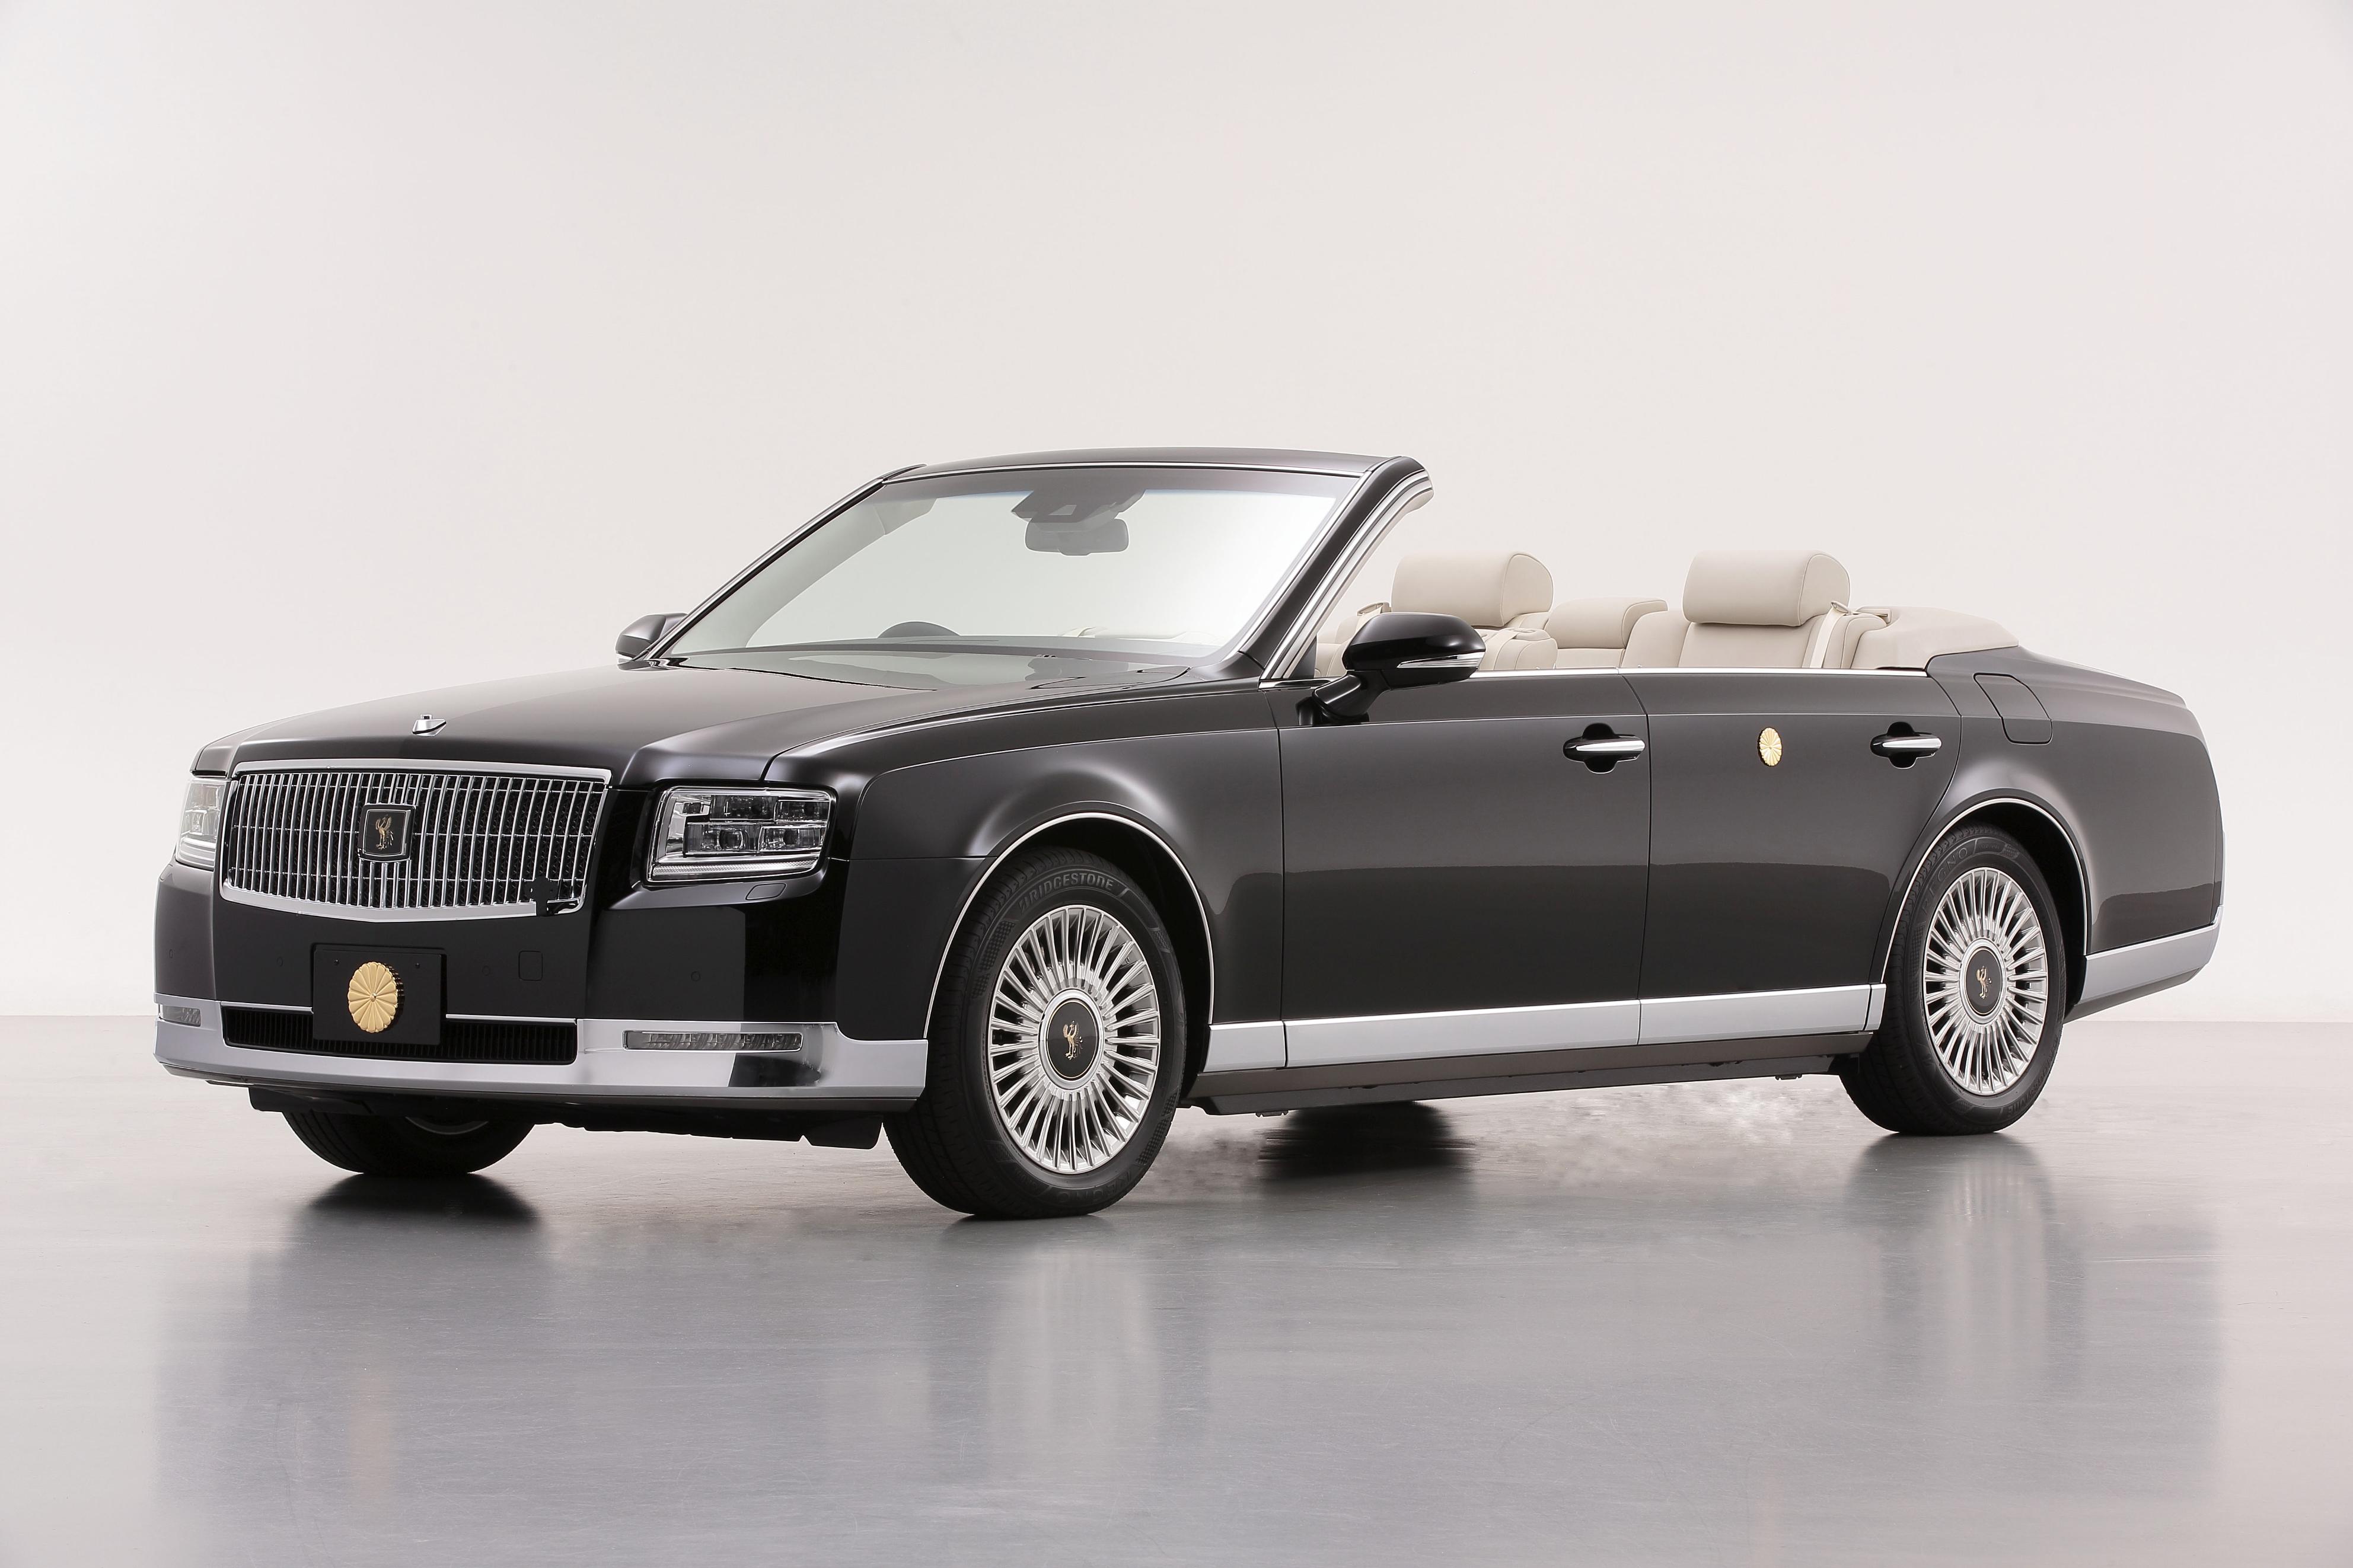 Here’s the new Emperor’s Toyota Century convertible Japanese